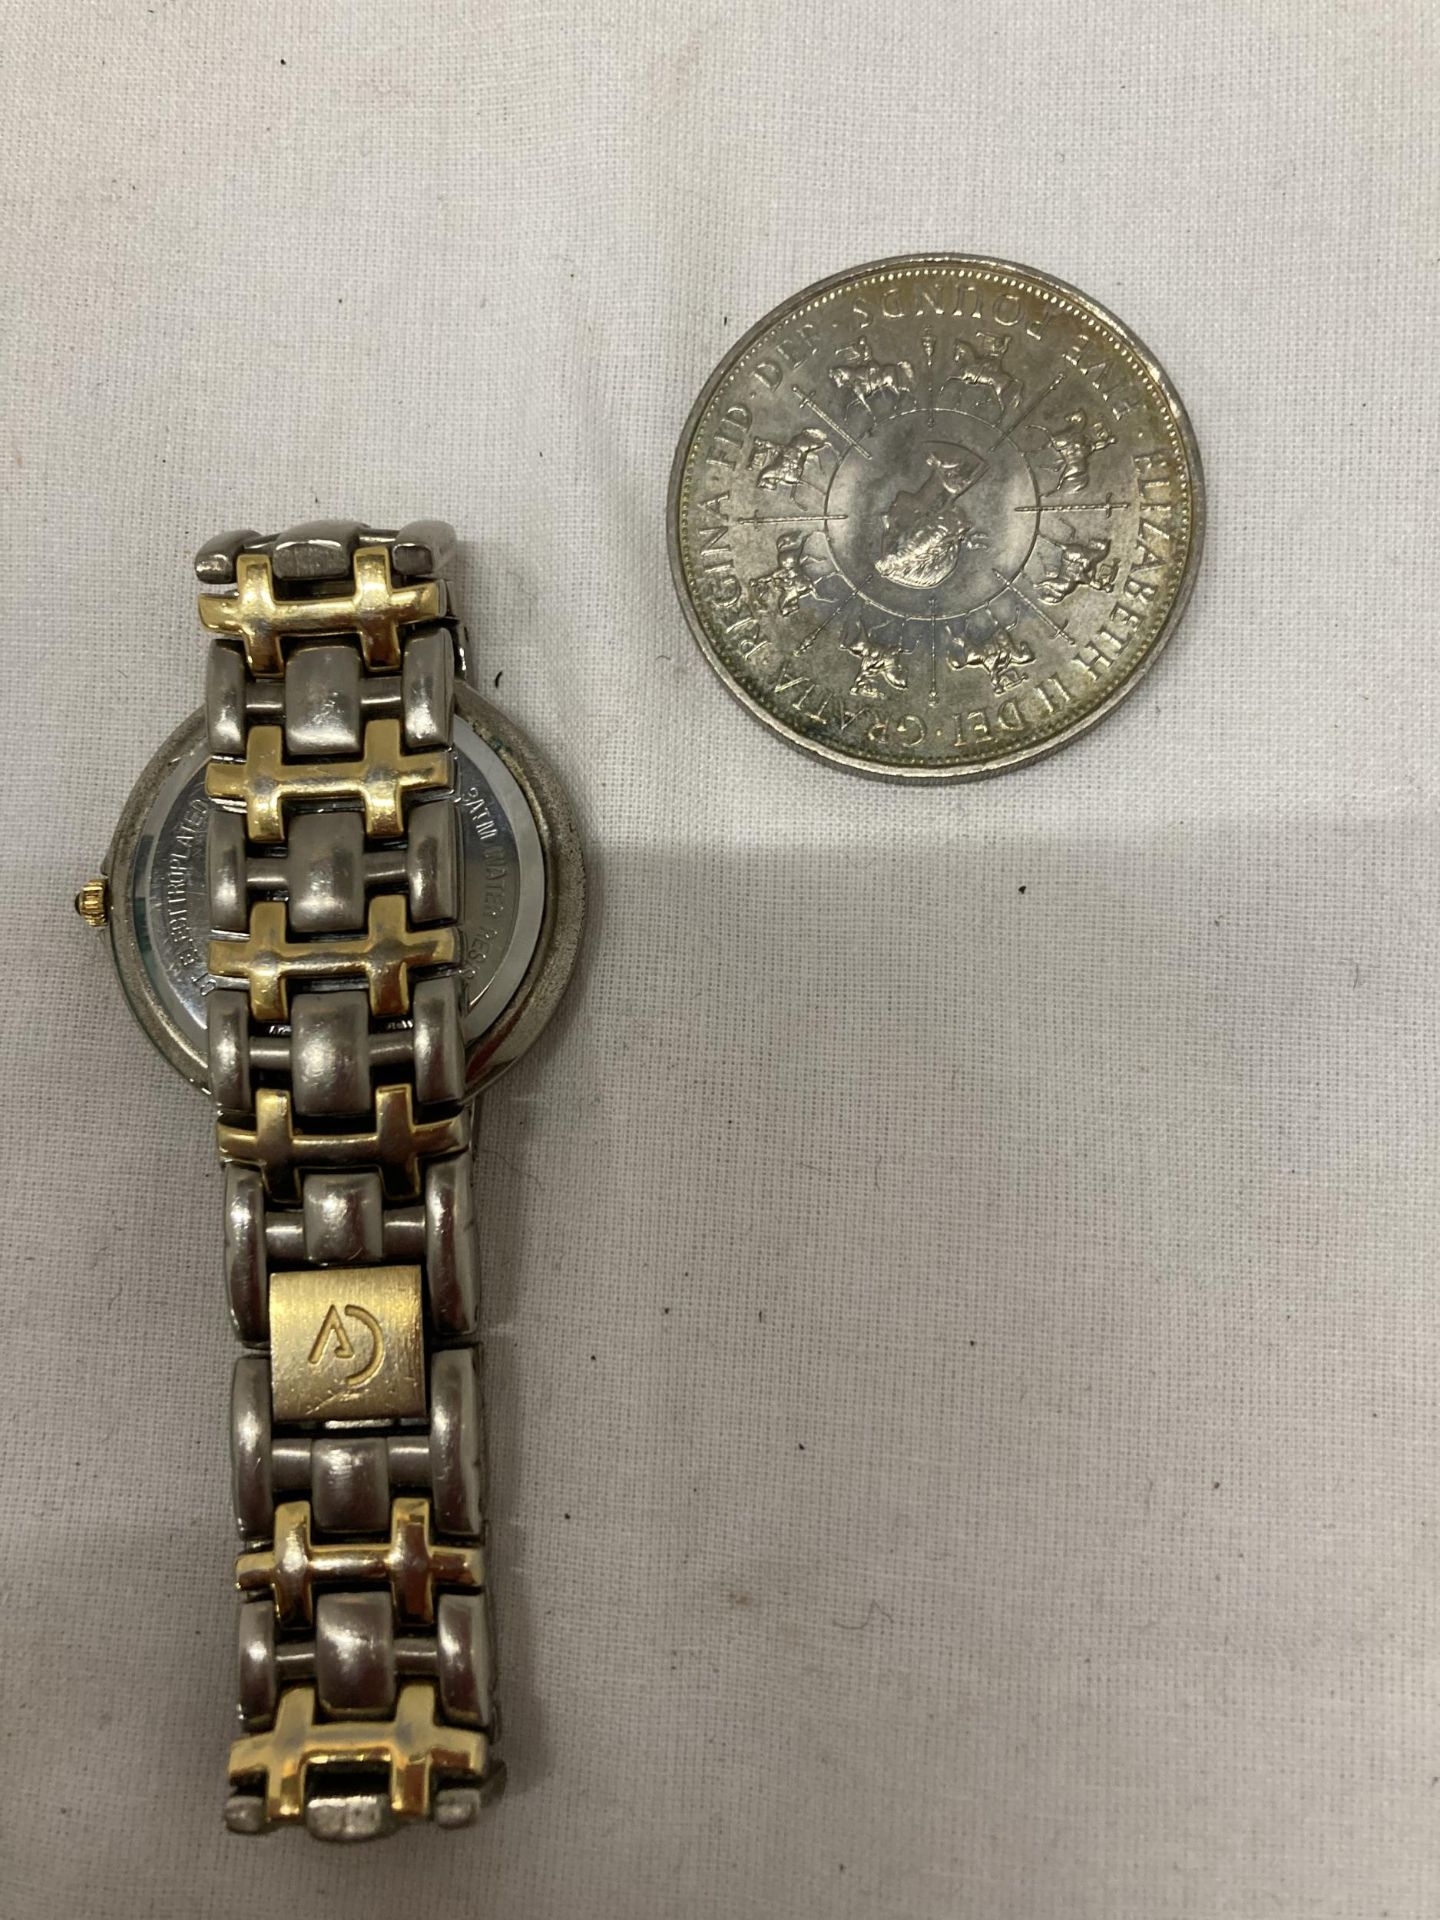 A CLAUDE VALENTINI BI METAL WATCH AND COMMEMORATIVE COIN - Image 3 of 3